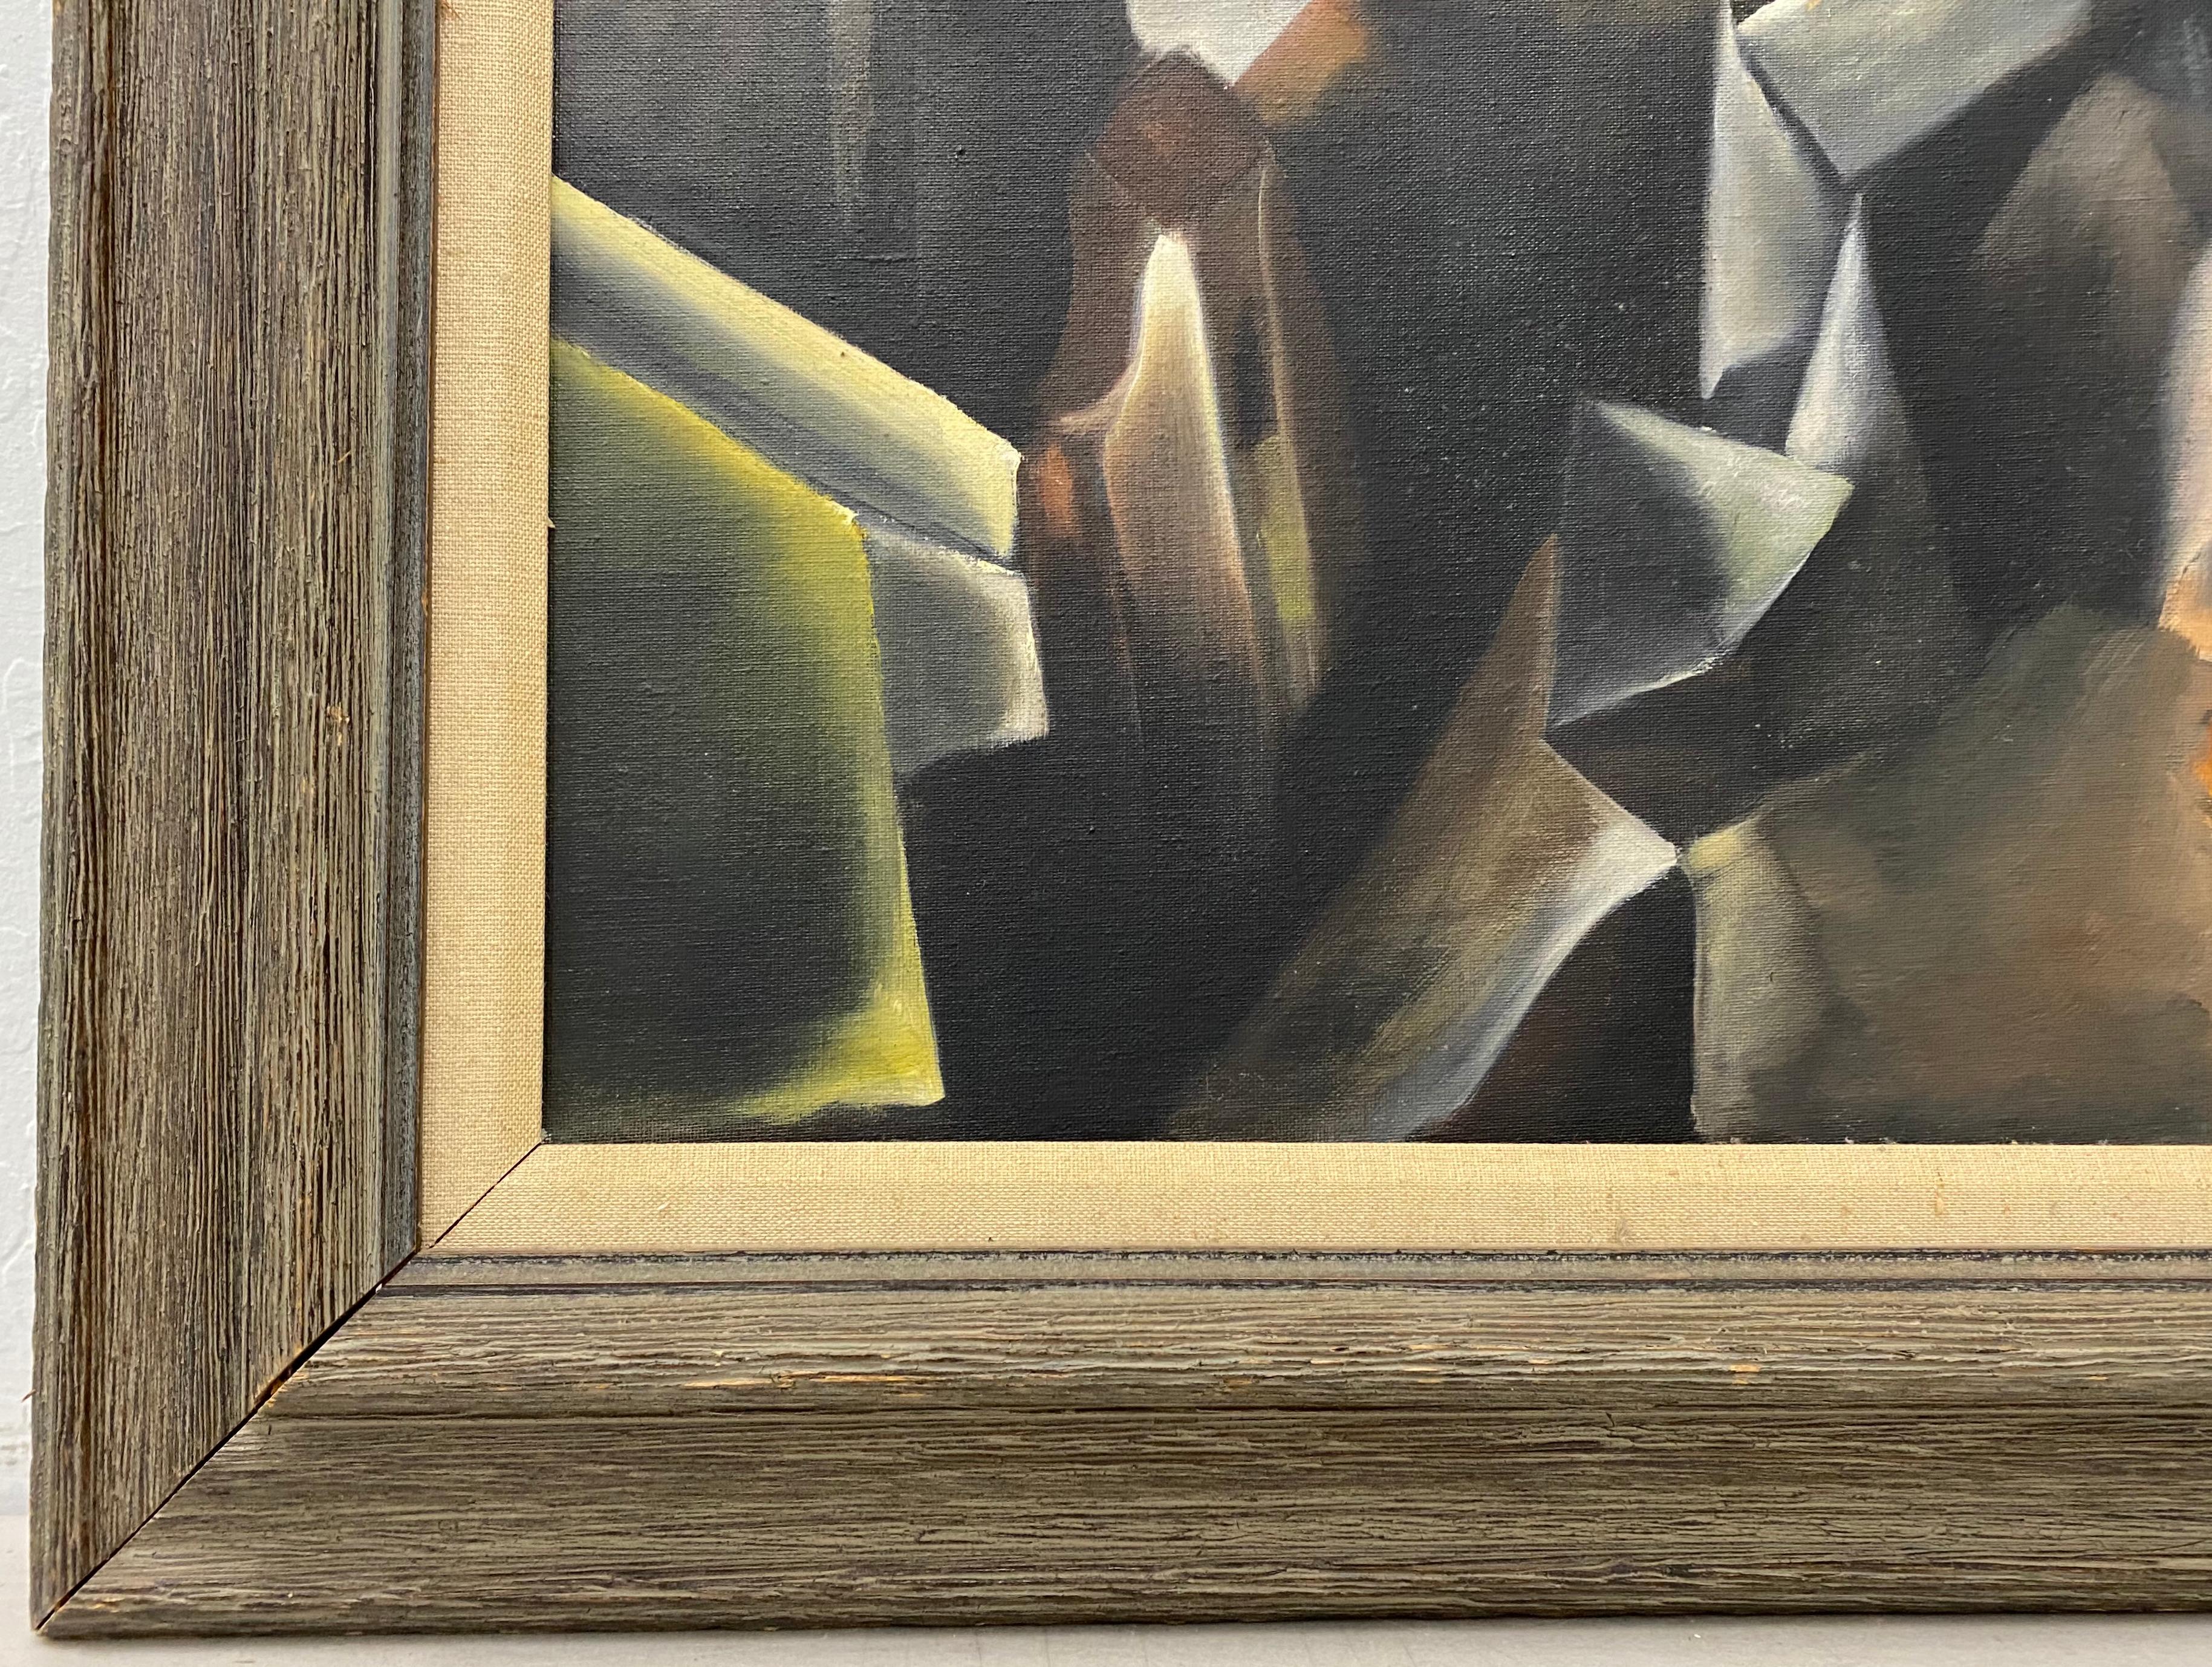 Vintage Cubist Still Life Oil Painting by Al Williams c.1940s to 1950s

Original oil on board

Dimensions 22